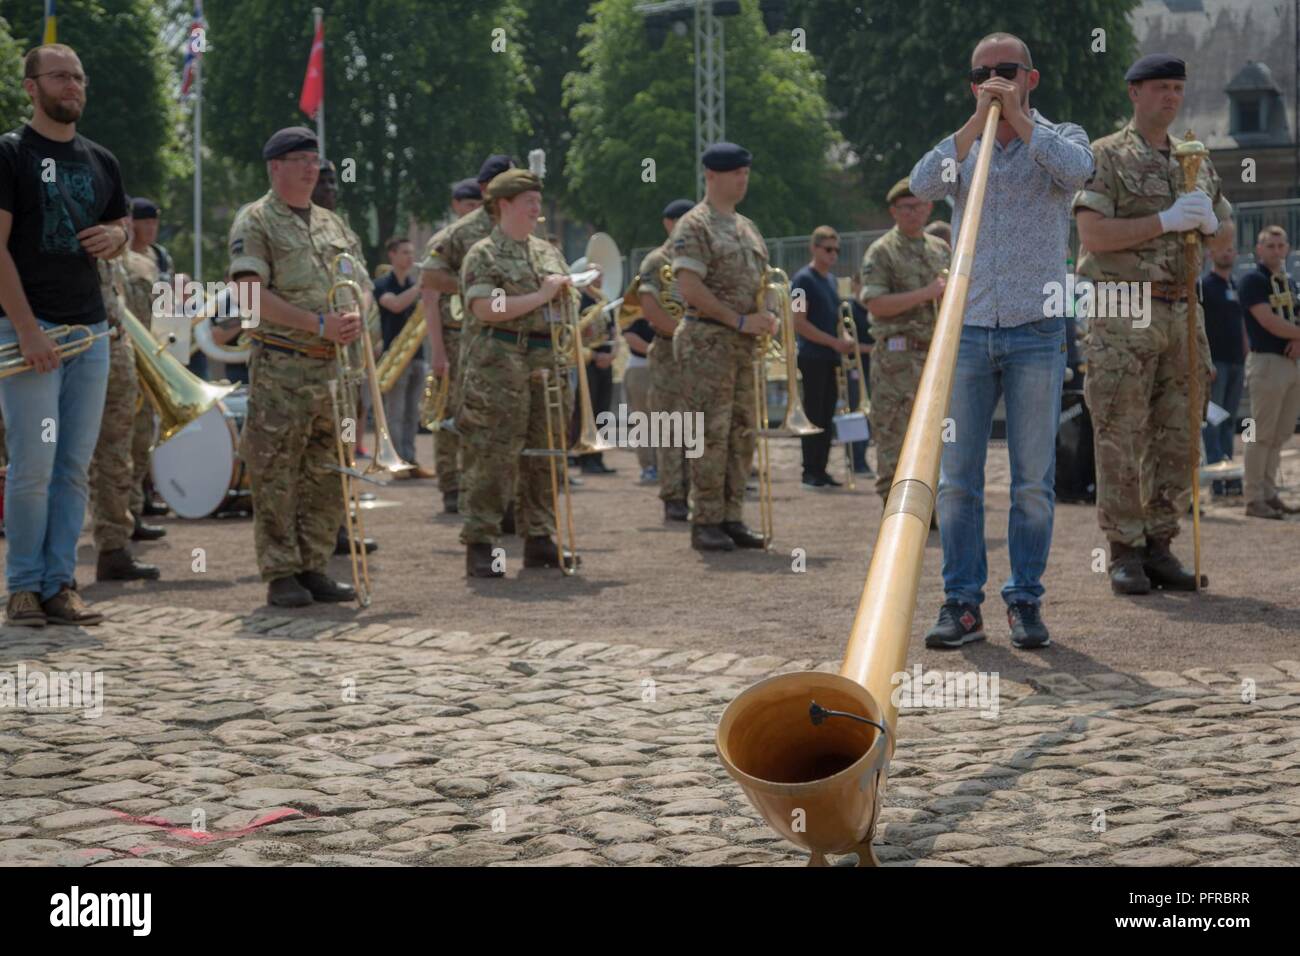 The alpine horn is performed during dress rehearsal for the Citadelle 350 anniversary military show.  US Army Stock Photo